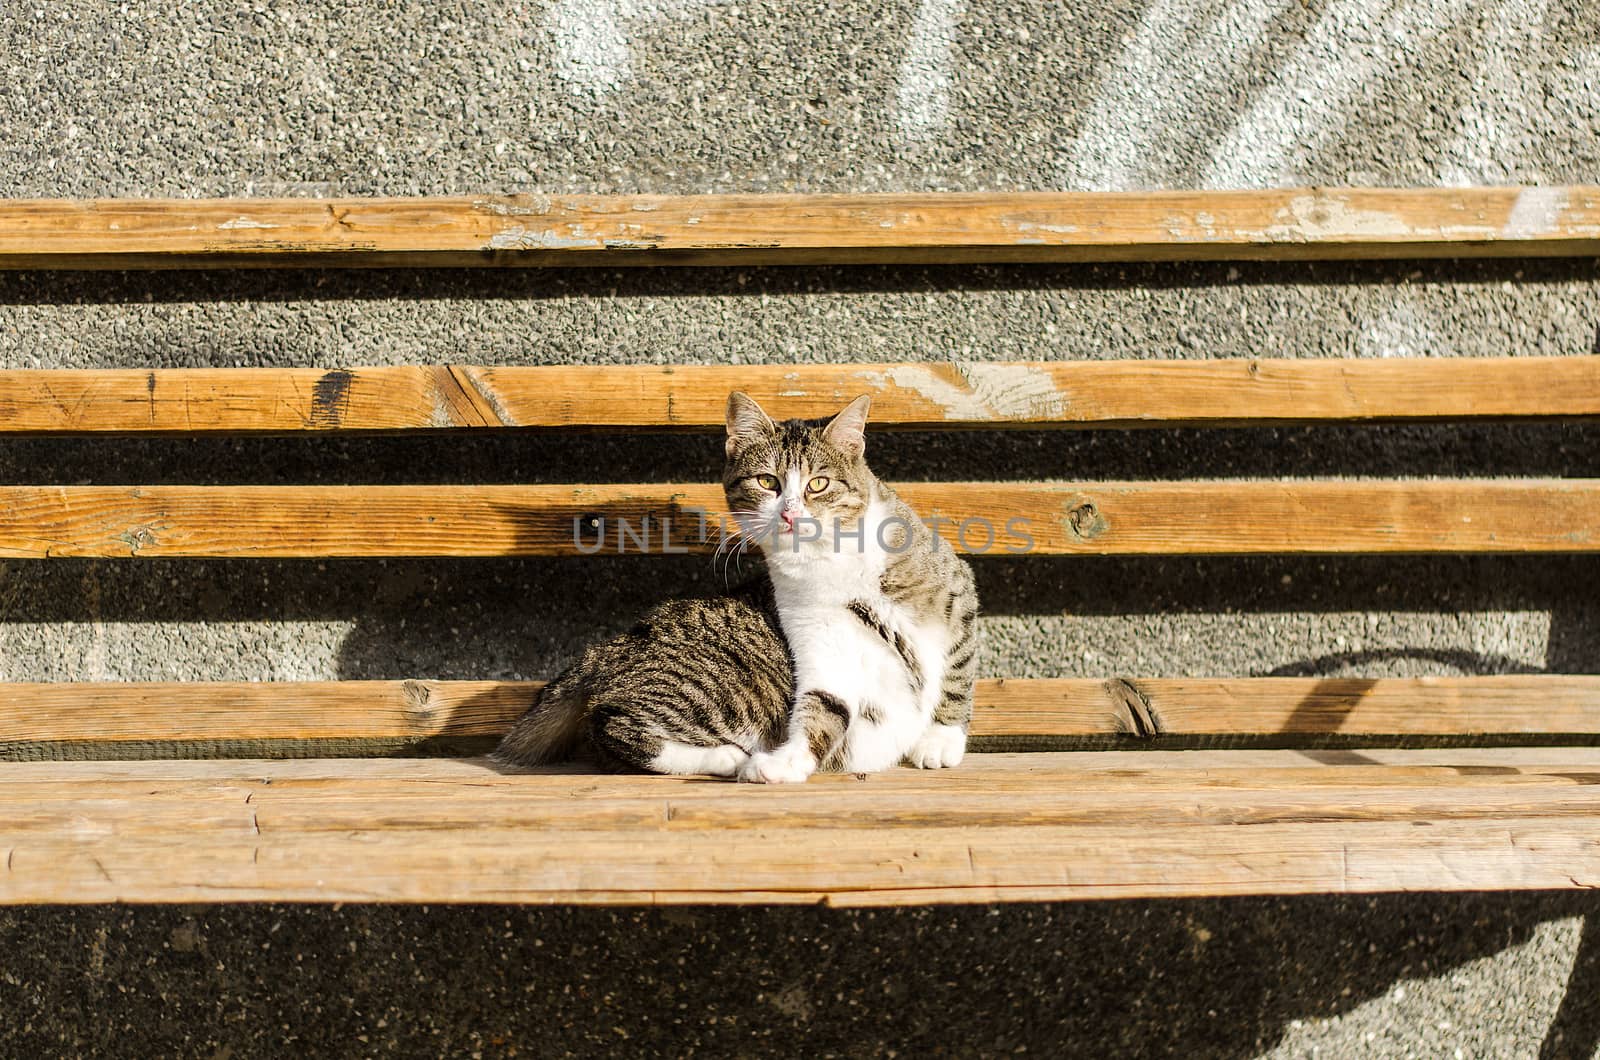 Scared cat on the bench by eenevski